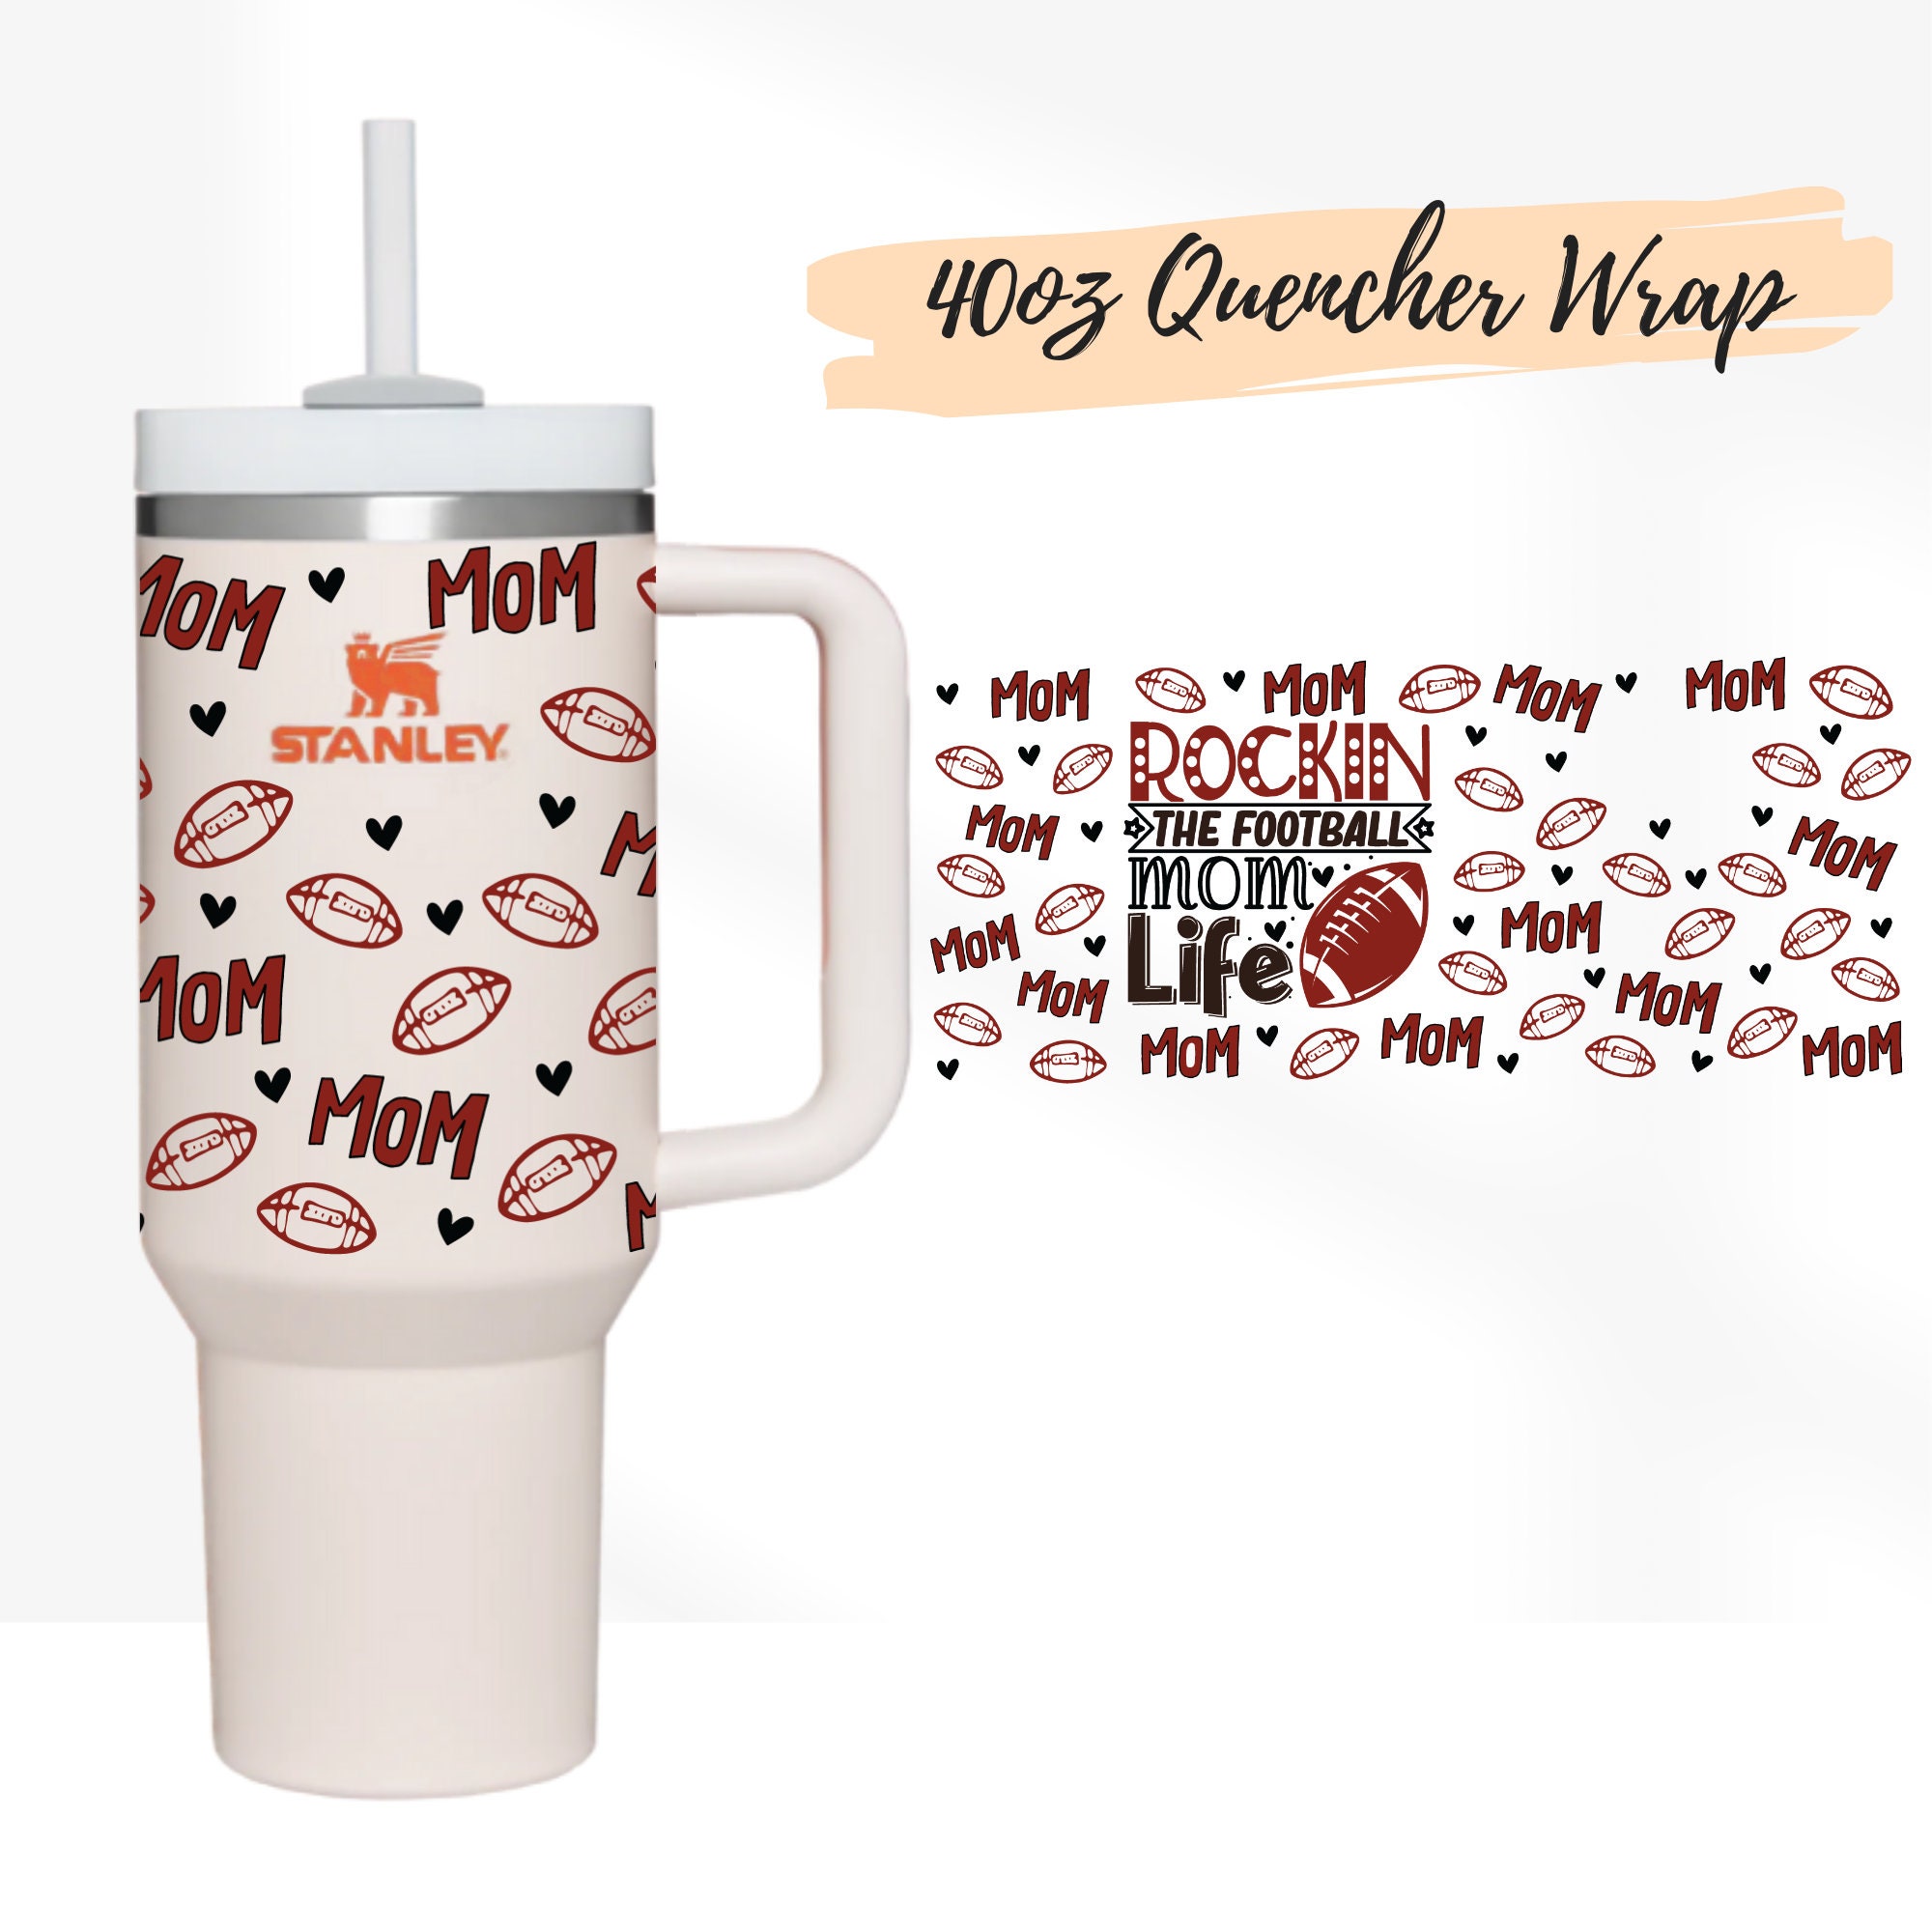 8 Designs 40oz Quencher Stanley Tumbler Wrap Cool Mom Moms Club